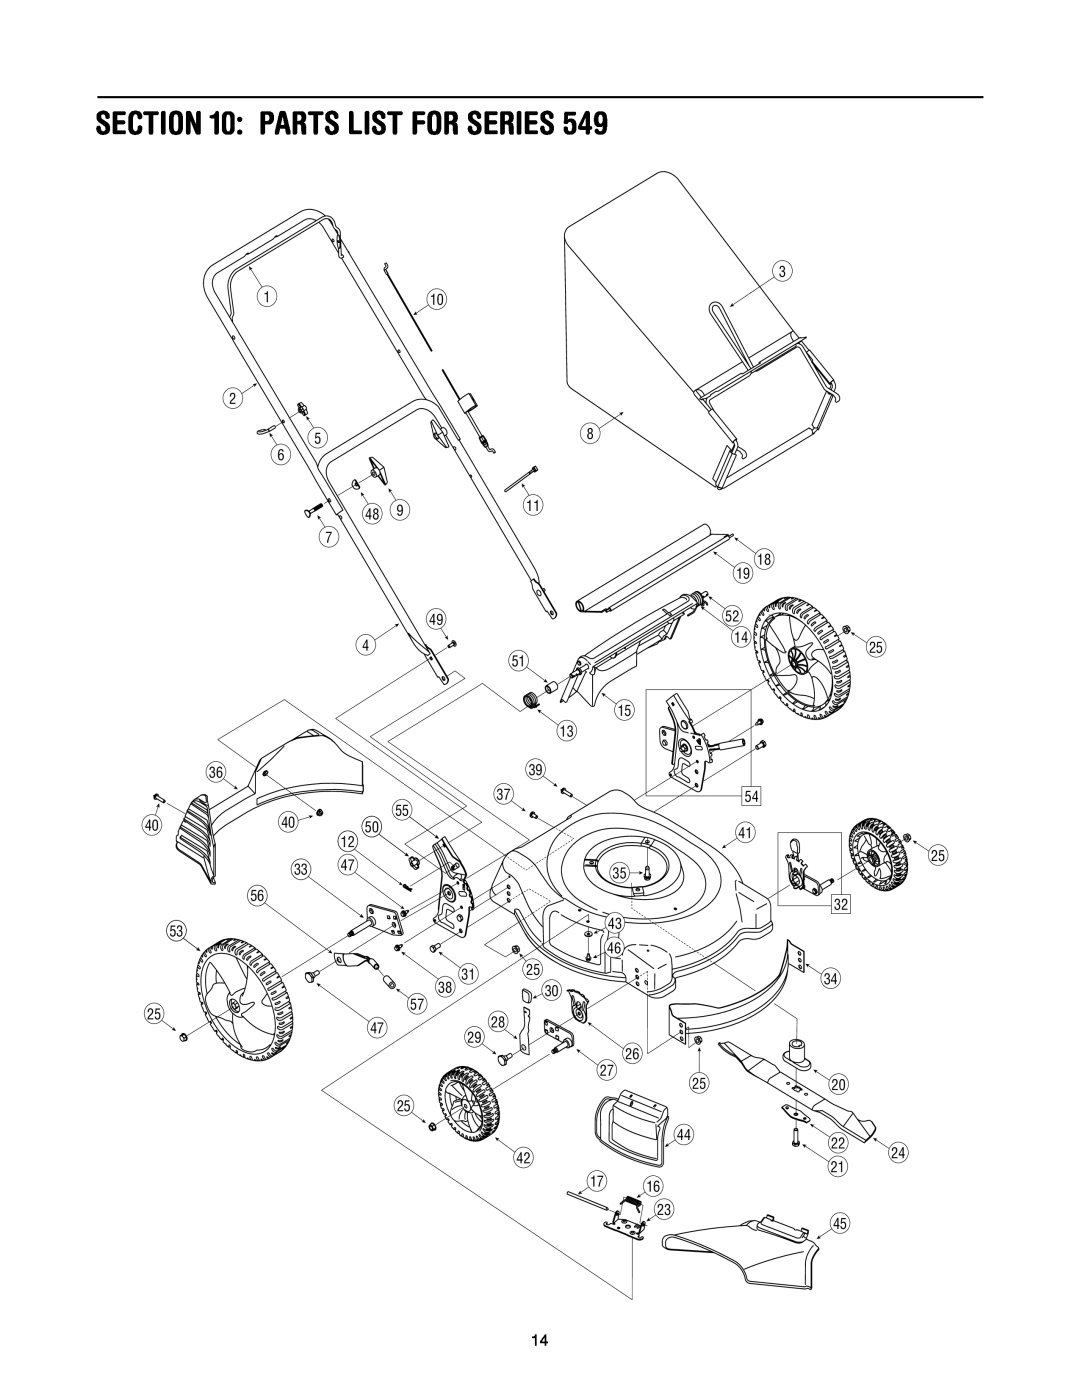 MTD 549 manual Parts List For Series 